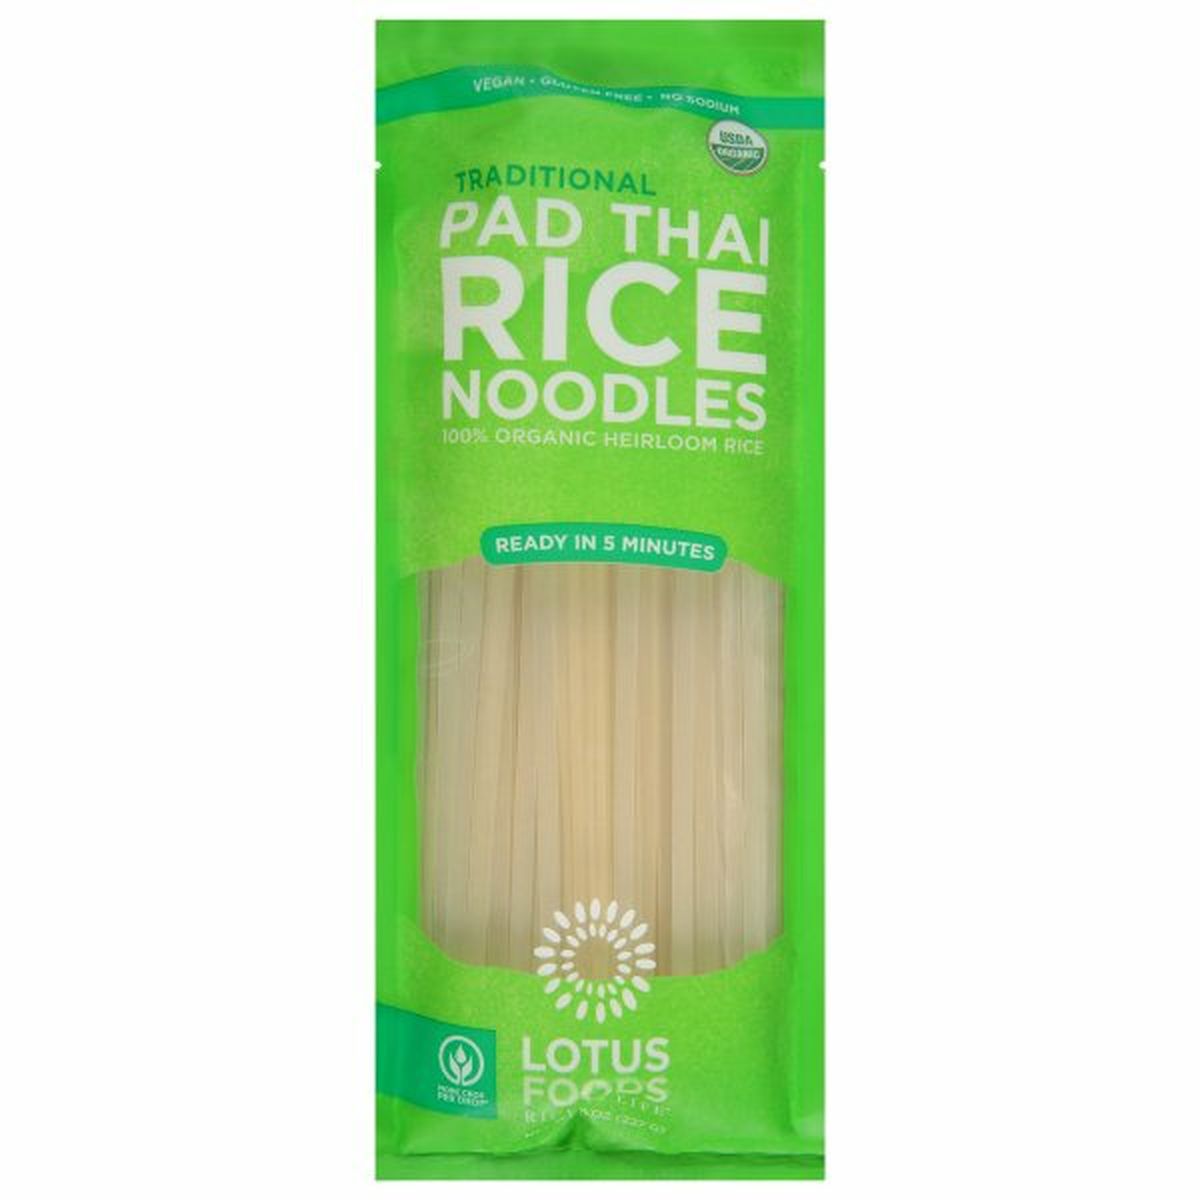 Calories in Lotus Foods Rice Noodles, Pad Thai, Traditional